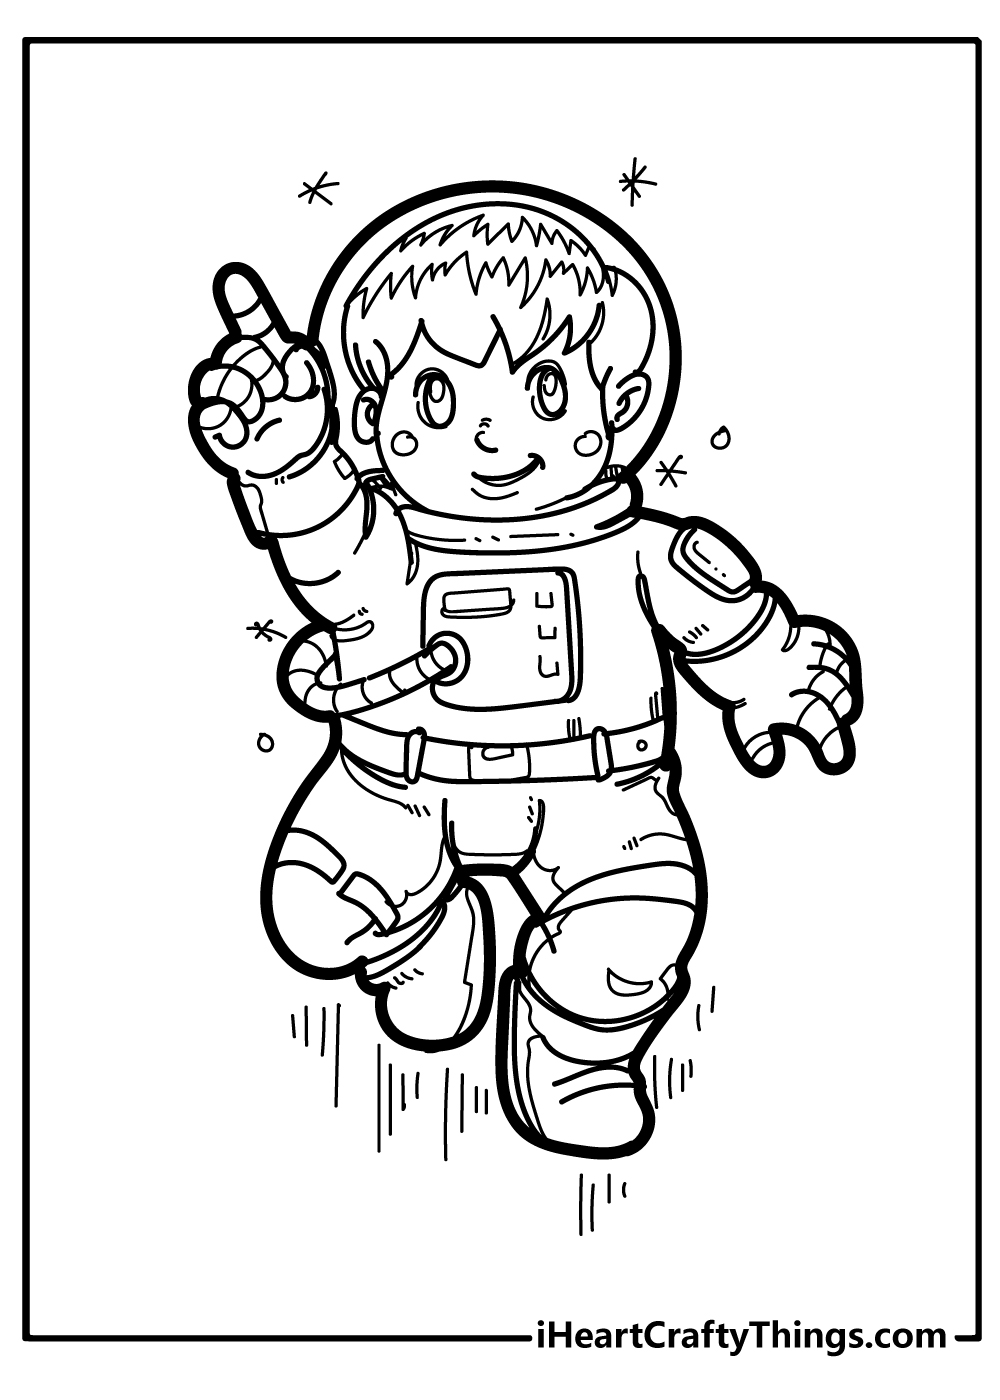 Astronaut Coloring Pages for preschoolers free printable